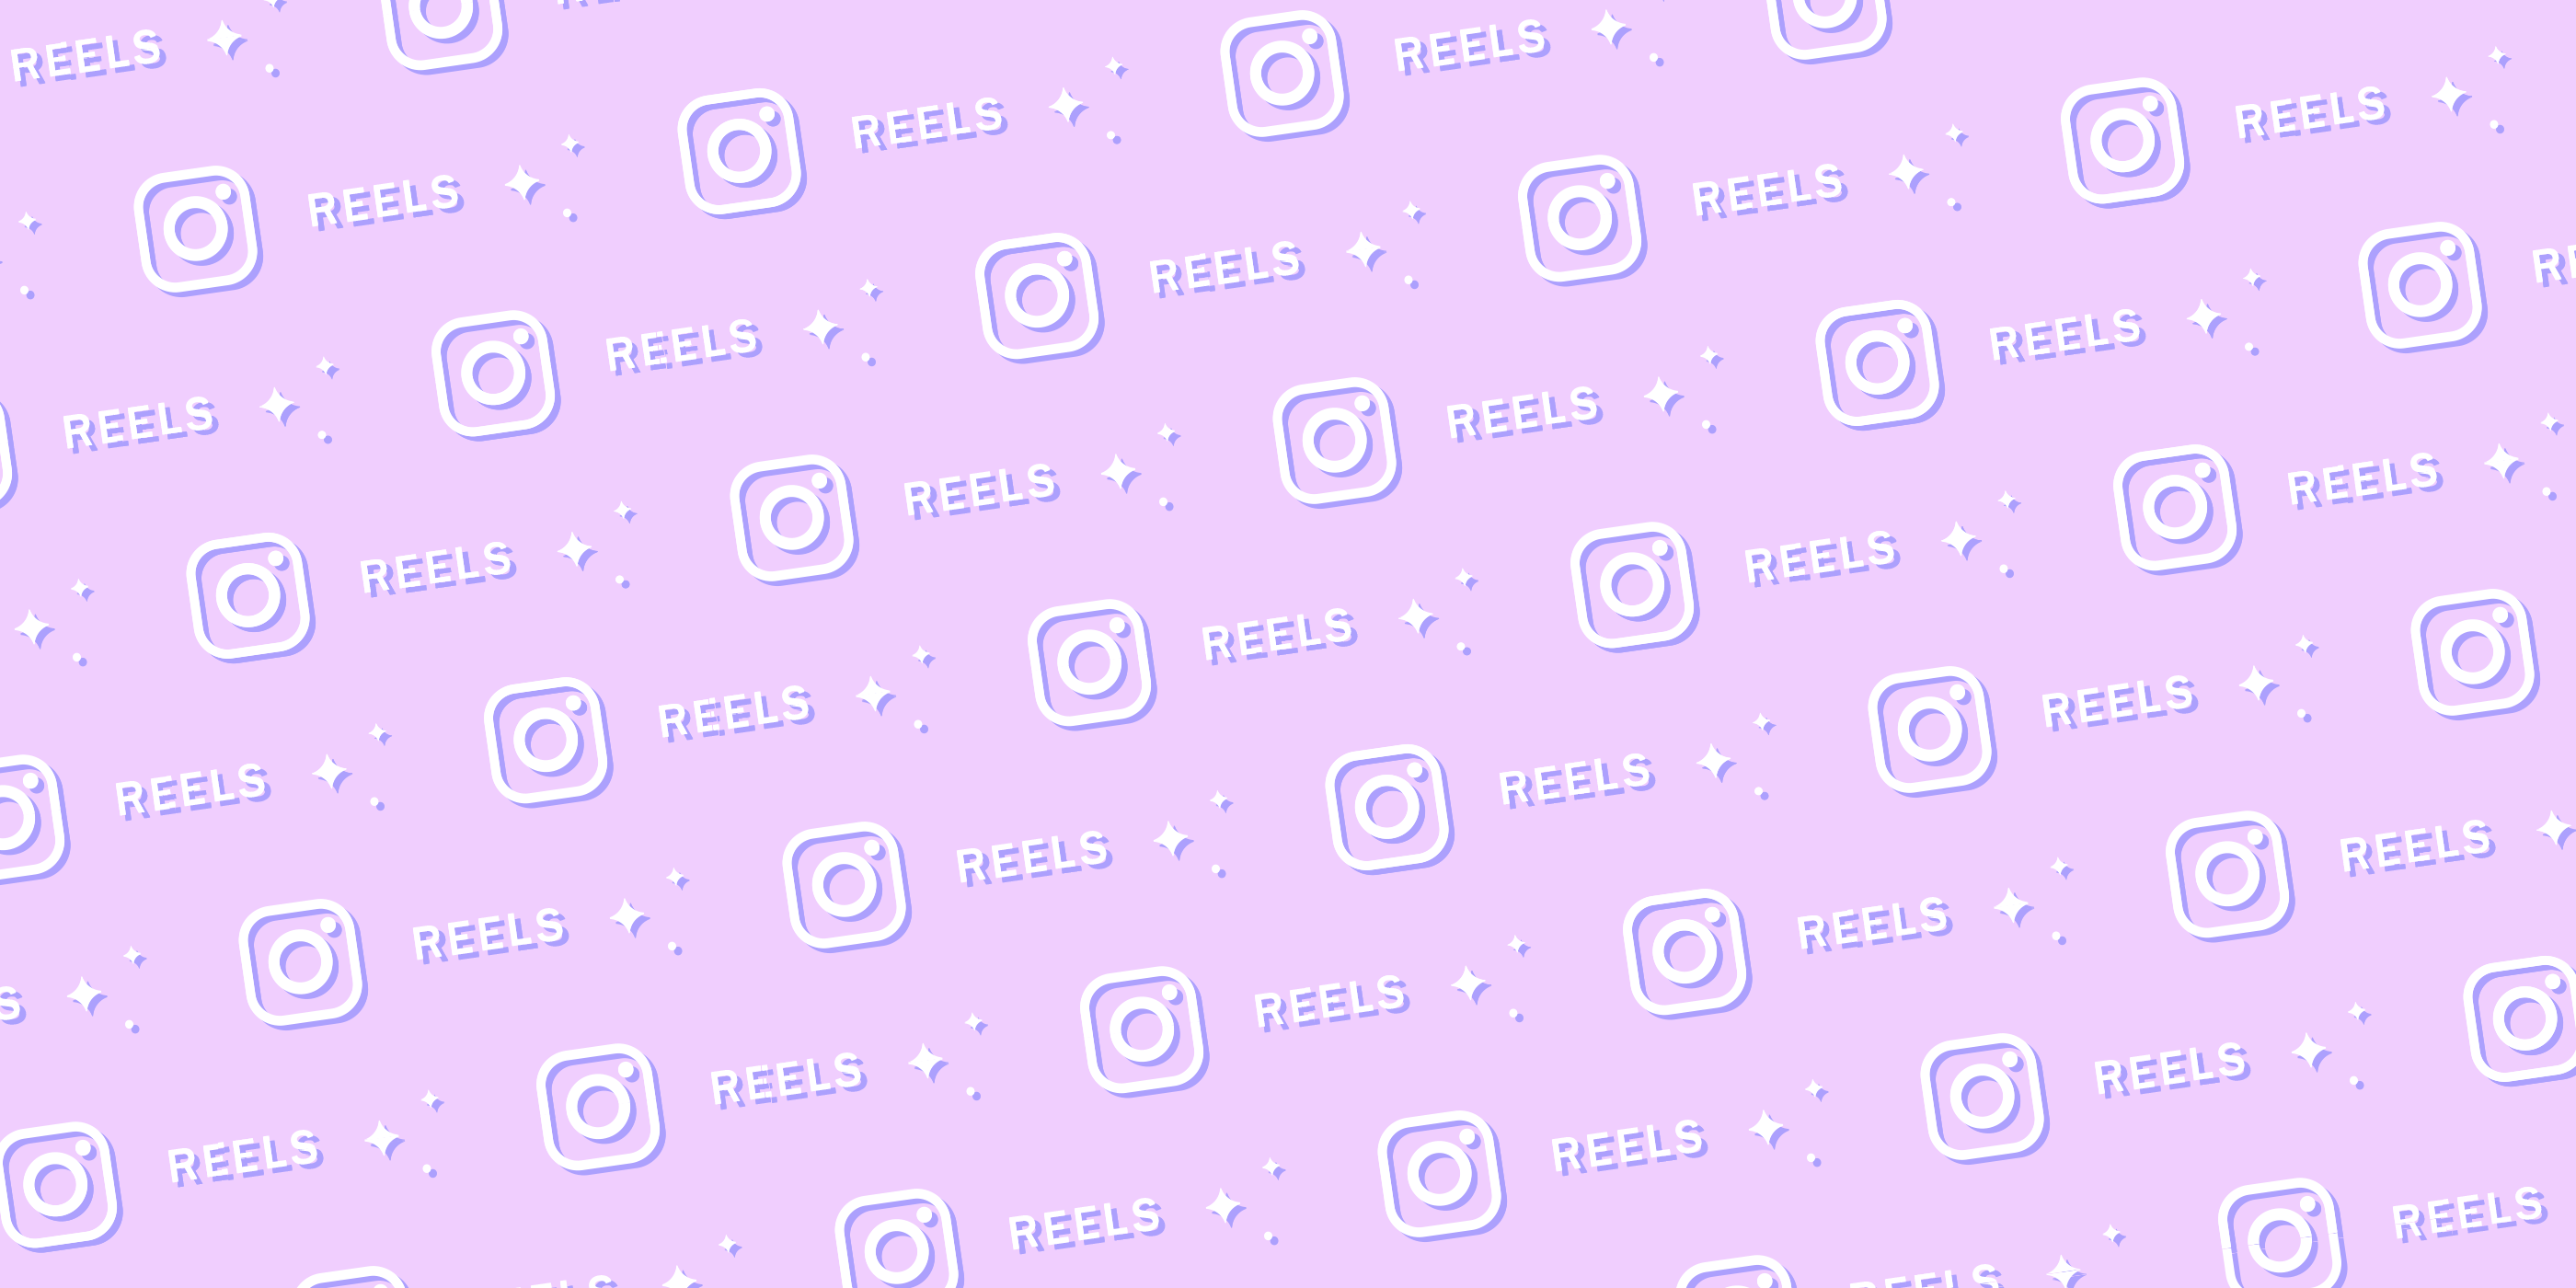 Read about Instagram Reels: Get to Know Social Media’s Next Big Thing, on PLANOLY